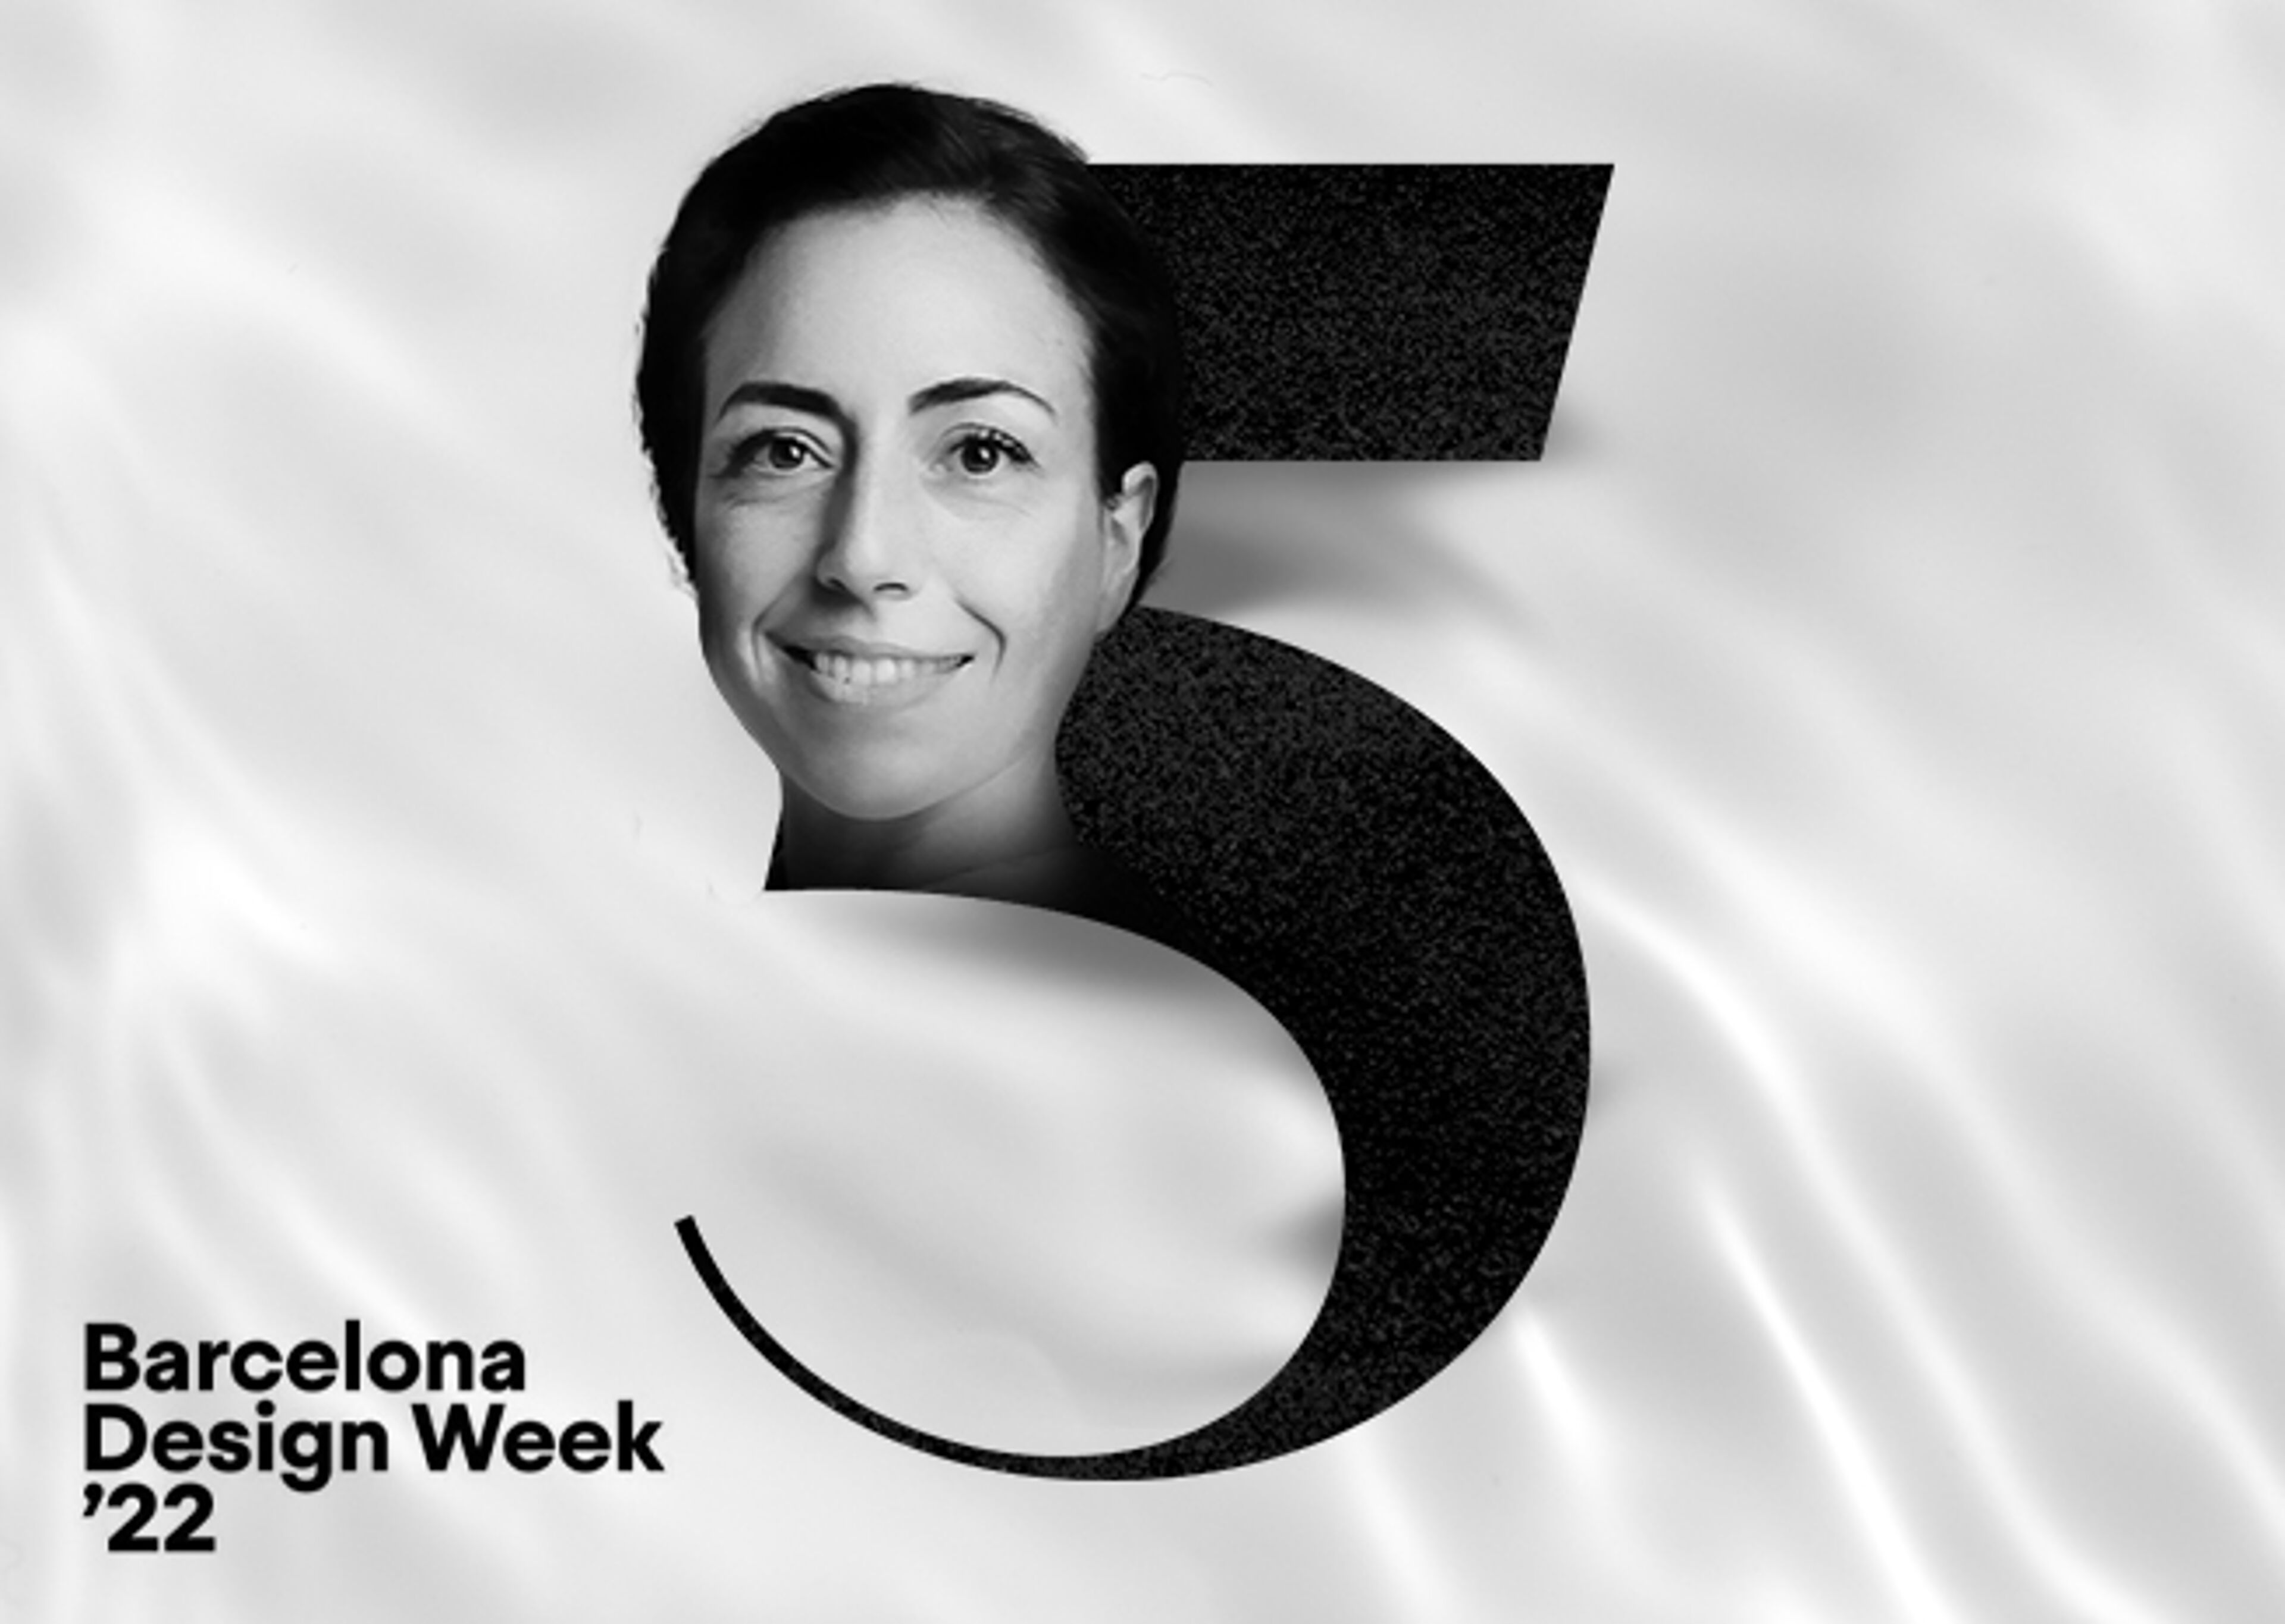 Black and white image featuring a woman's smiling face alongside the bold number '5', for Barcelona Design Week 2022.